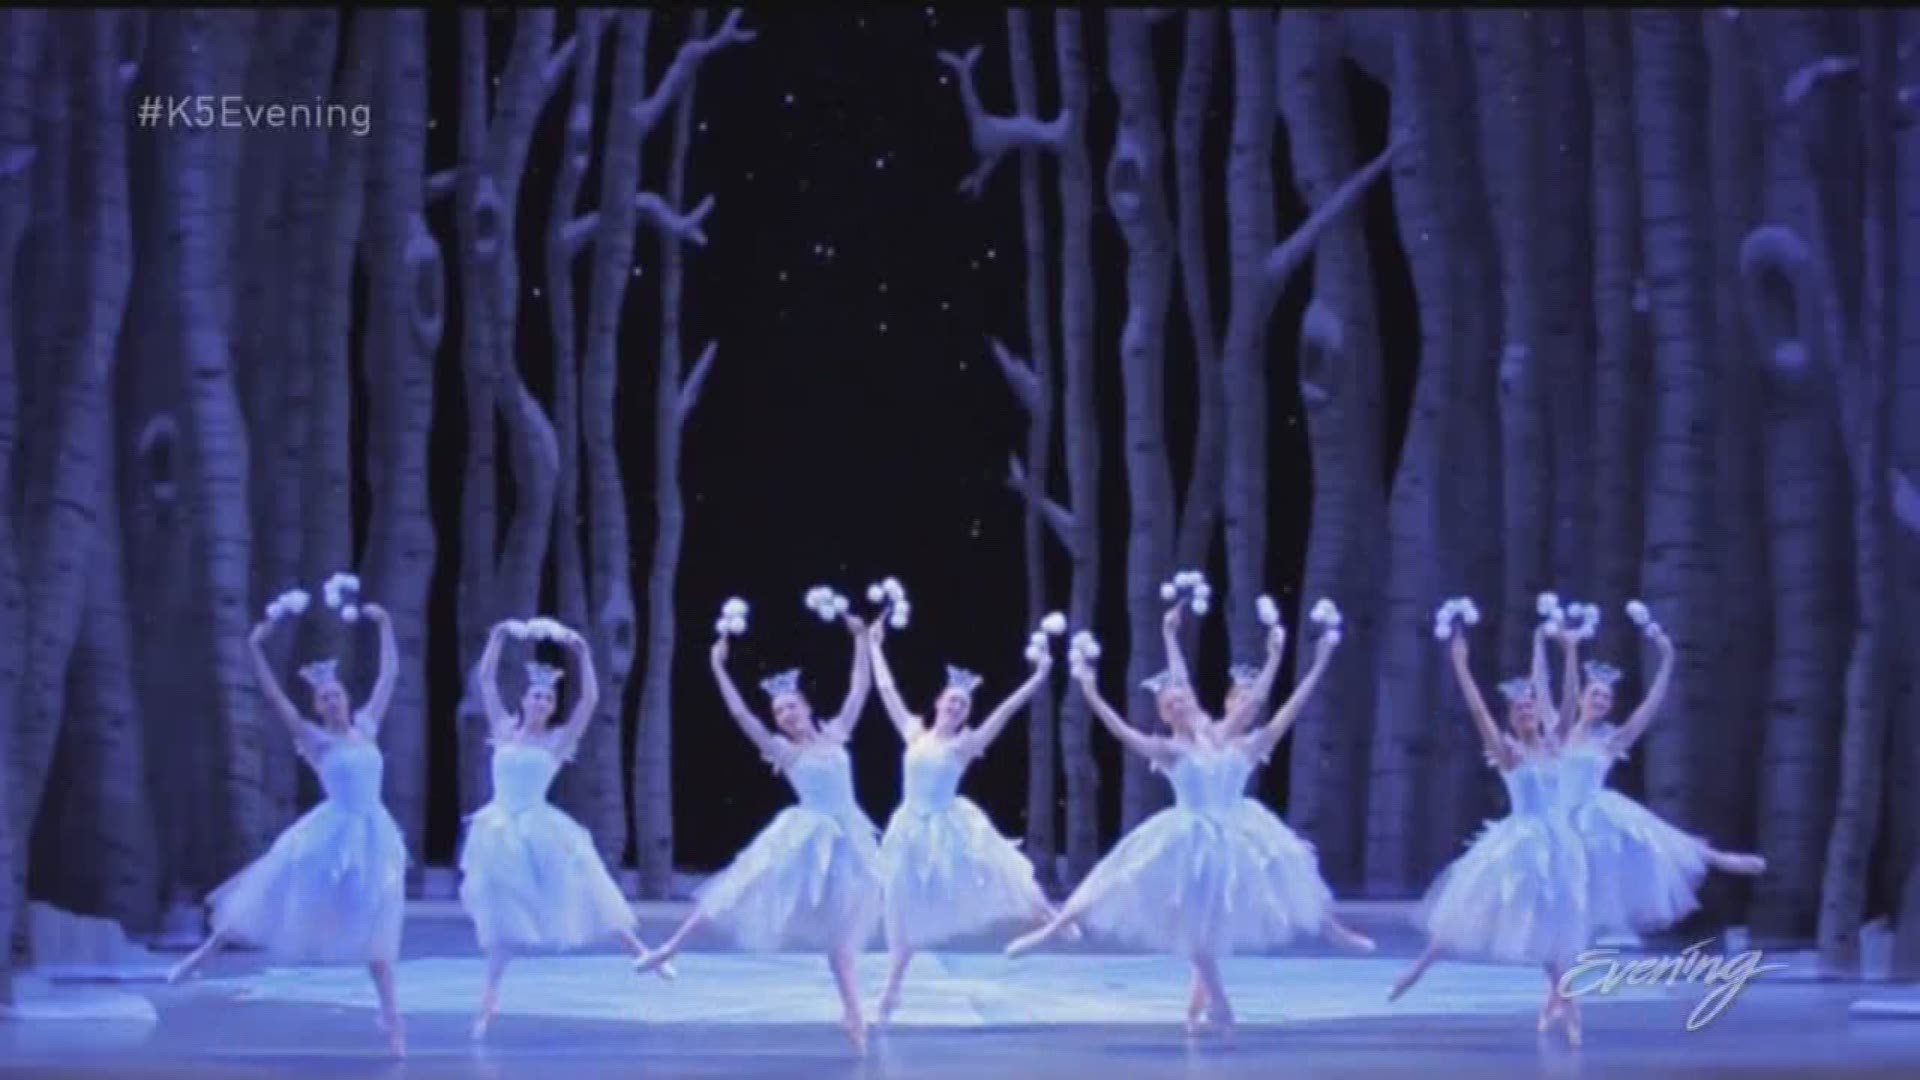 Few things say "Christmas" like the Pacific Northwest Ballet's production of The Nutcracker, and we're going behind the scenes to meet one of the cast members.